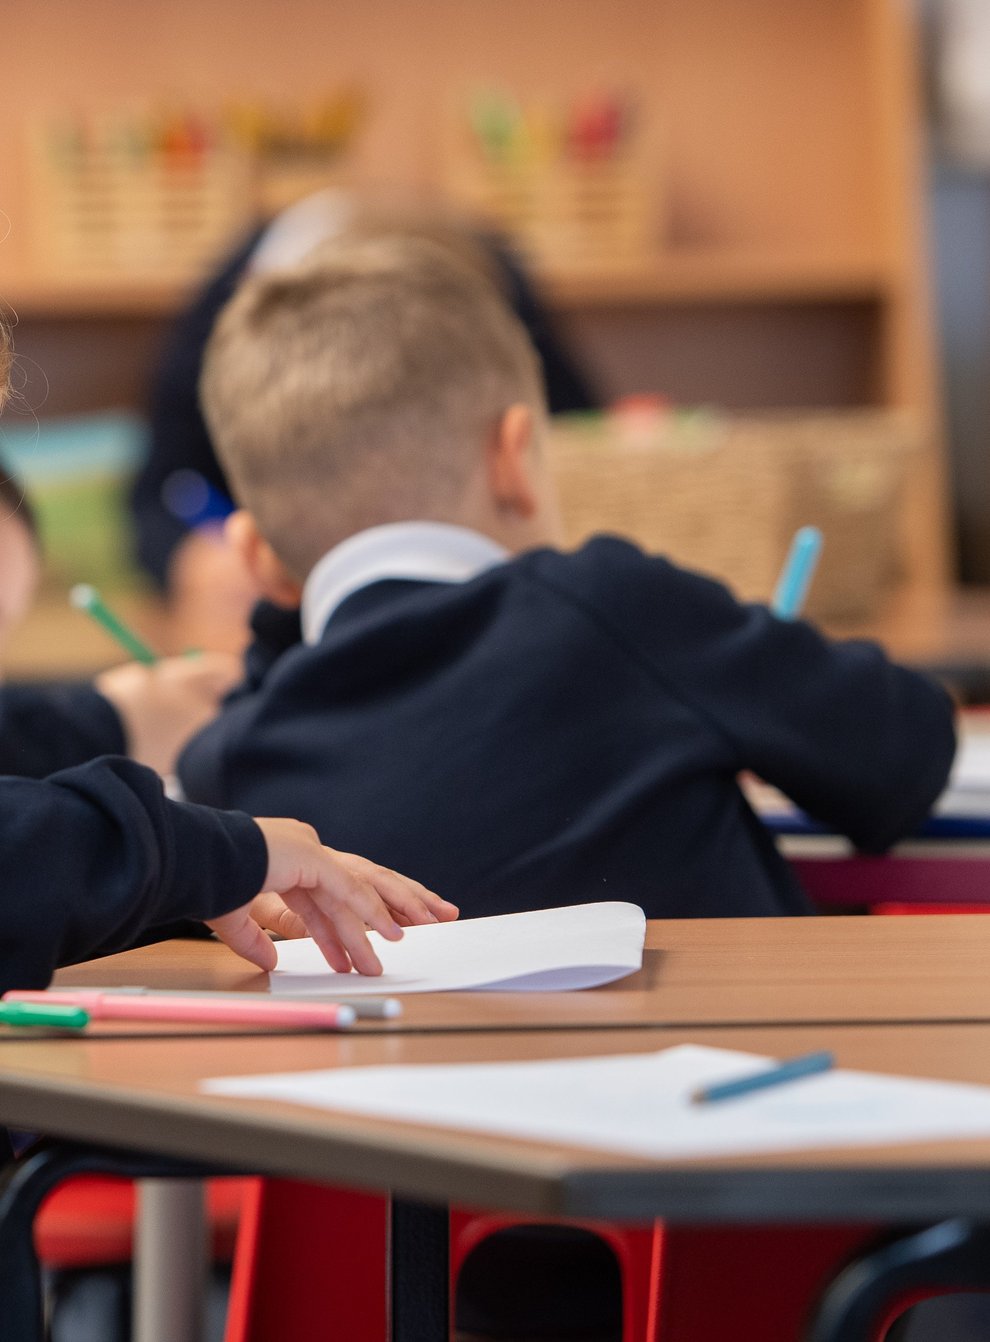 Many primary school pupils had little to no contact with their friends during the five-month period before schools fully reopened